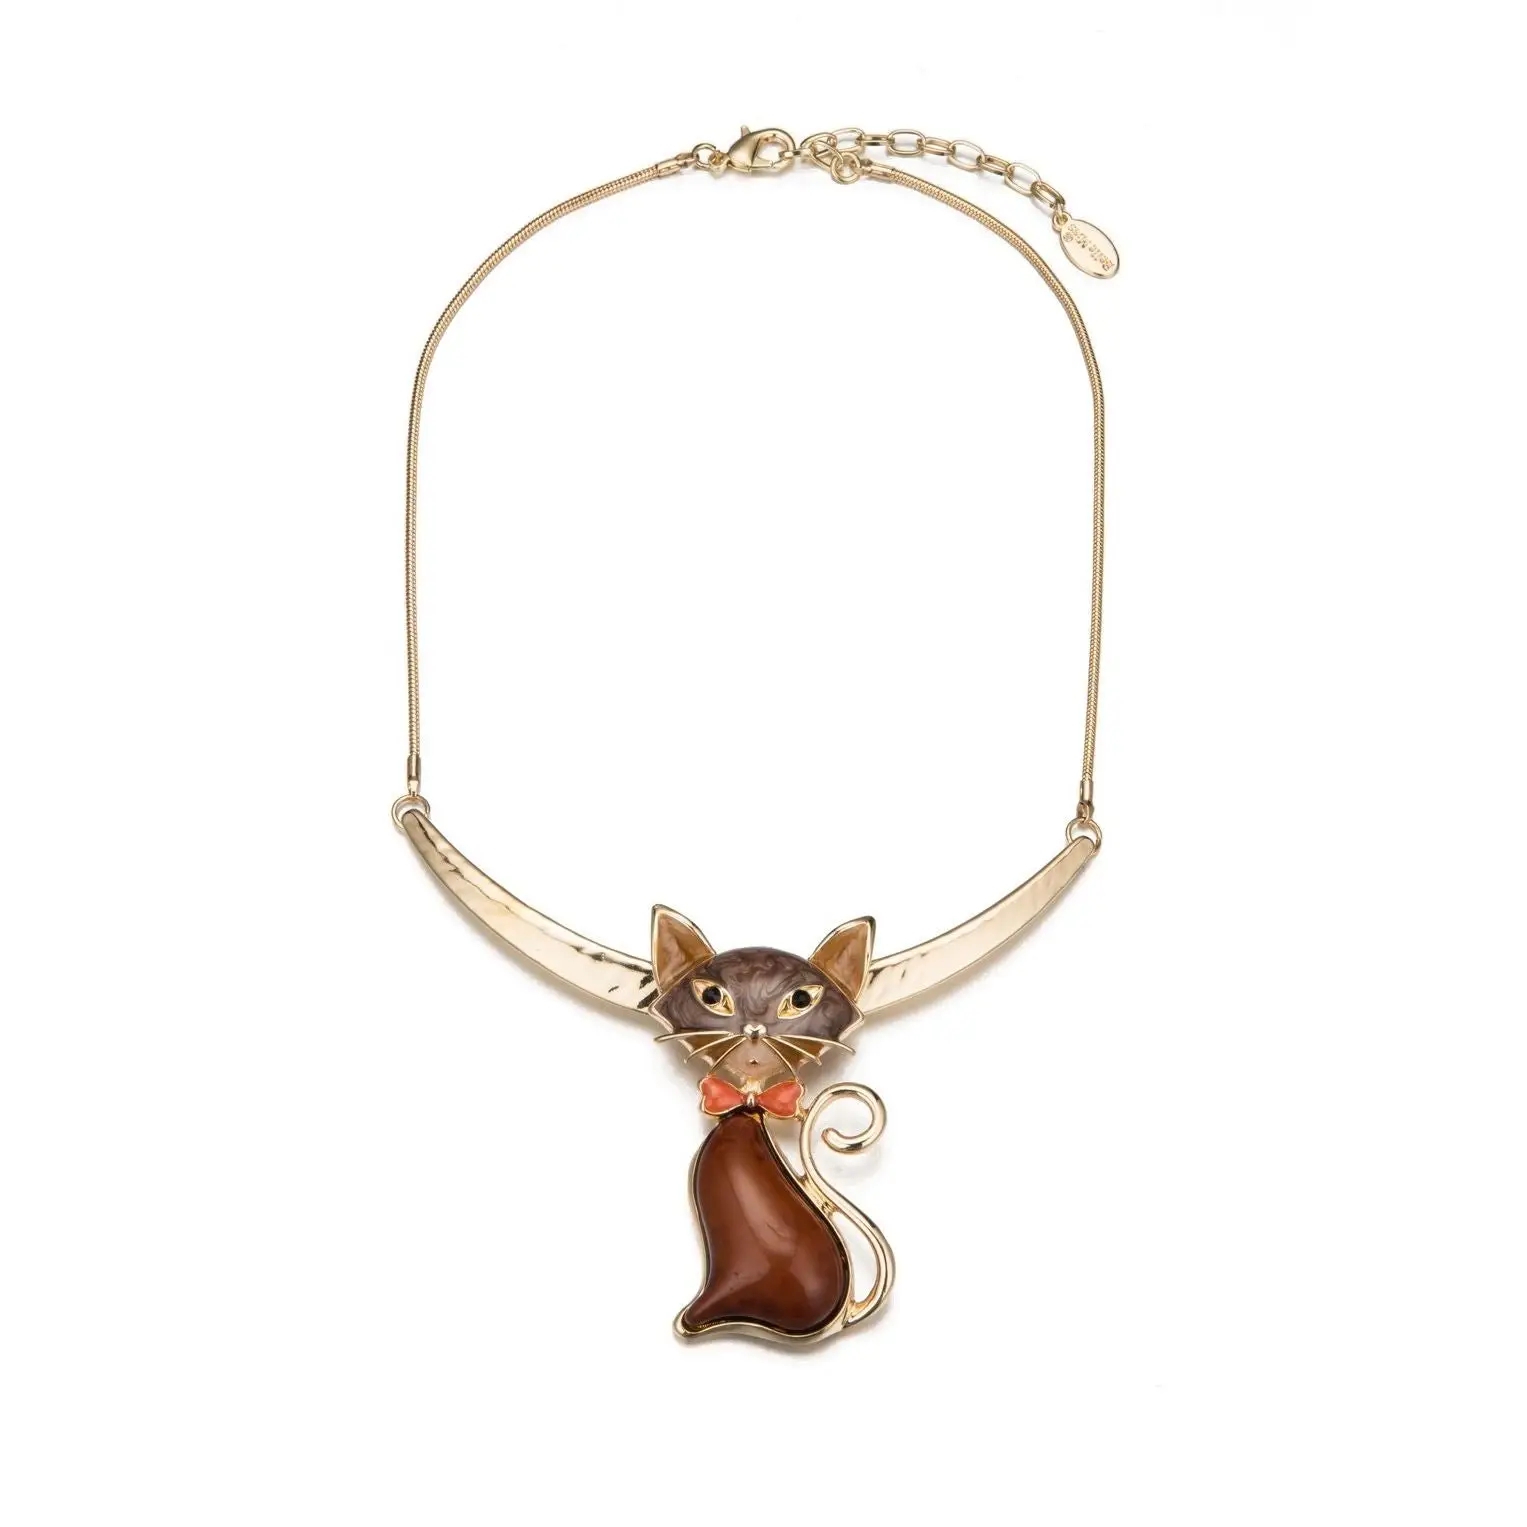 BMCOL005b_collier-retro-pinup-vintage-cat-chat